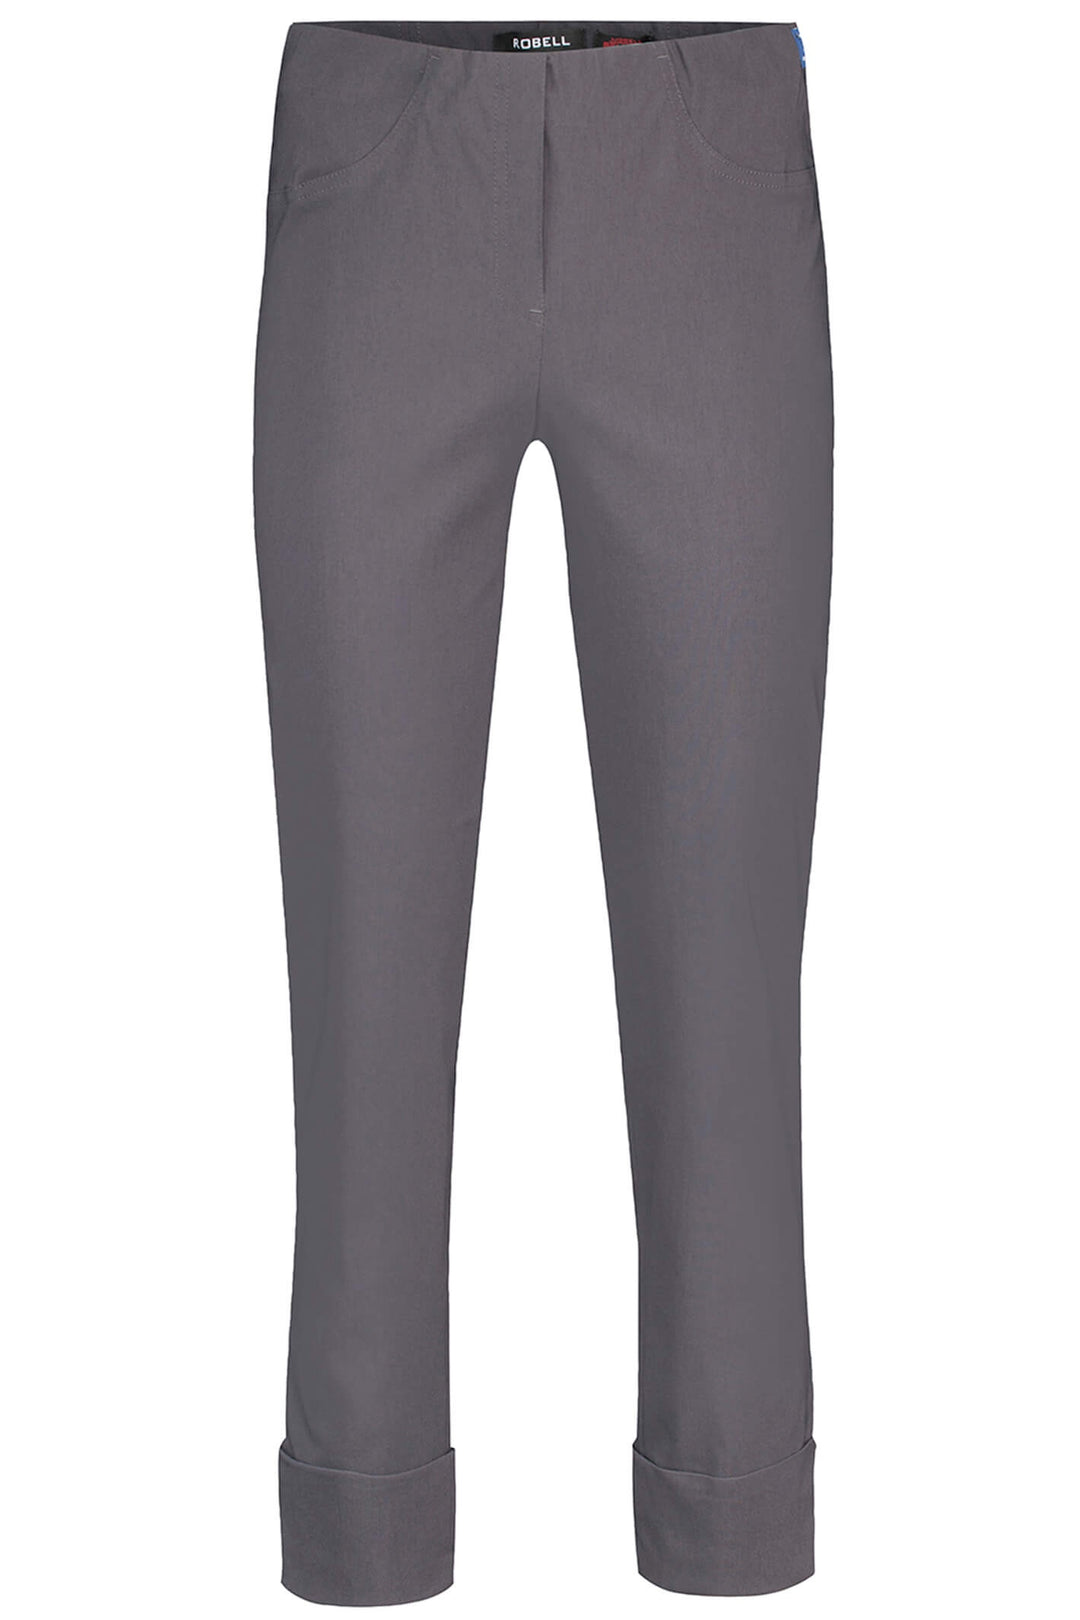 Robell 51568-5499-97 Bella 09 Charcoal Grey Ankle Grazer Trousers - Dotique